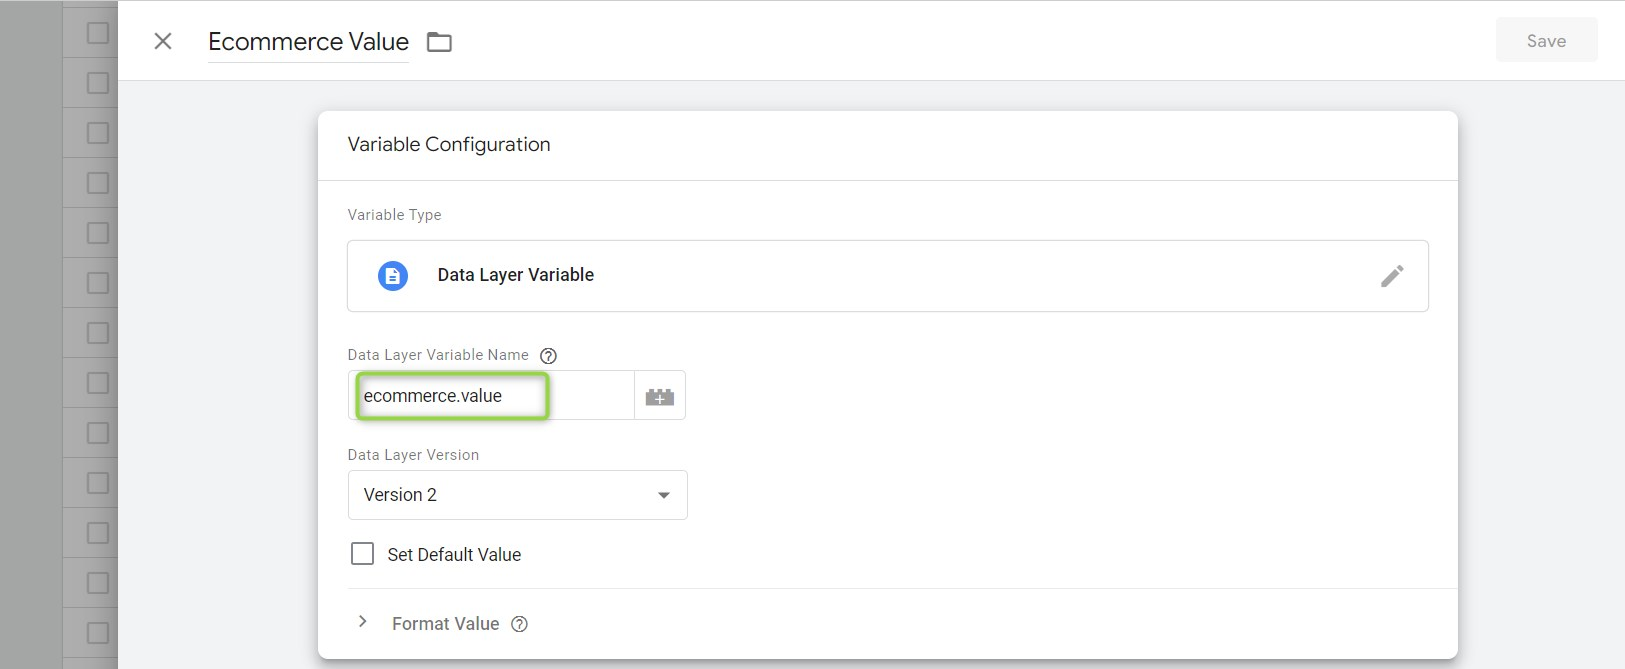 Data Layer variable Purchase Value